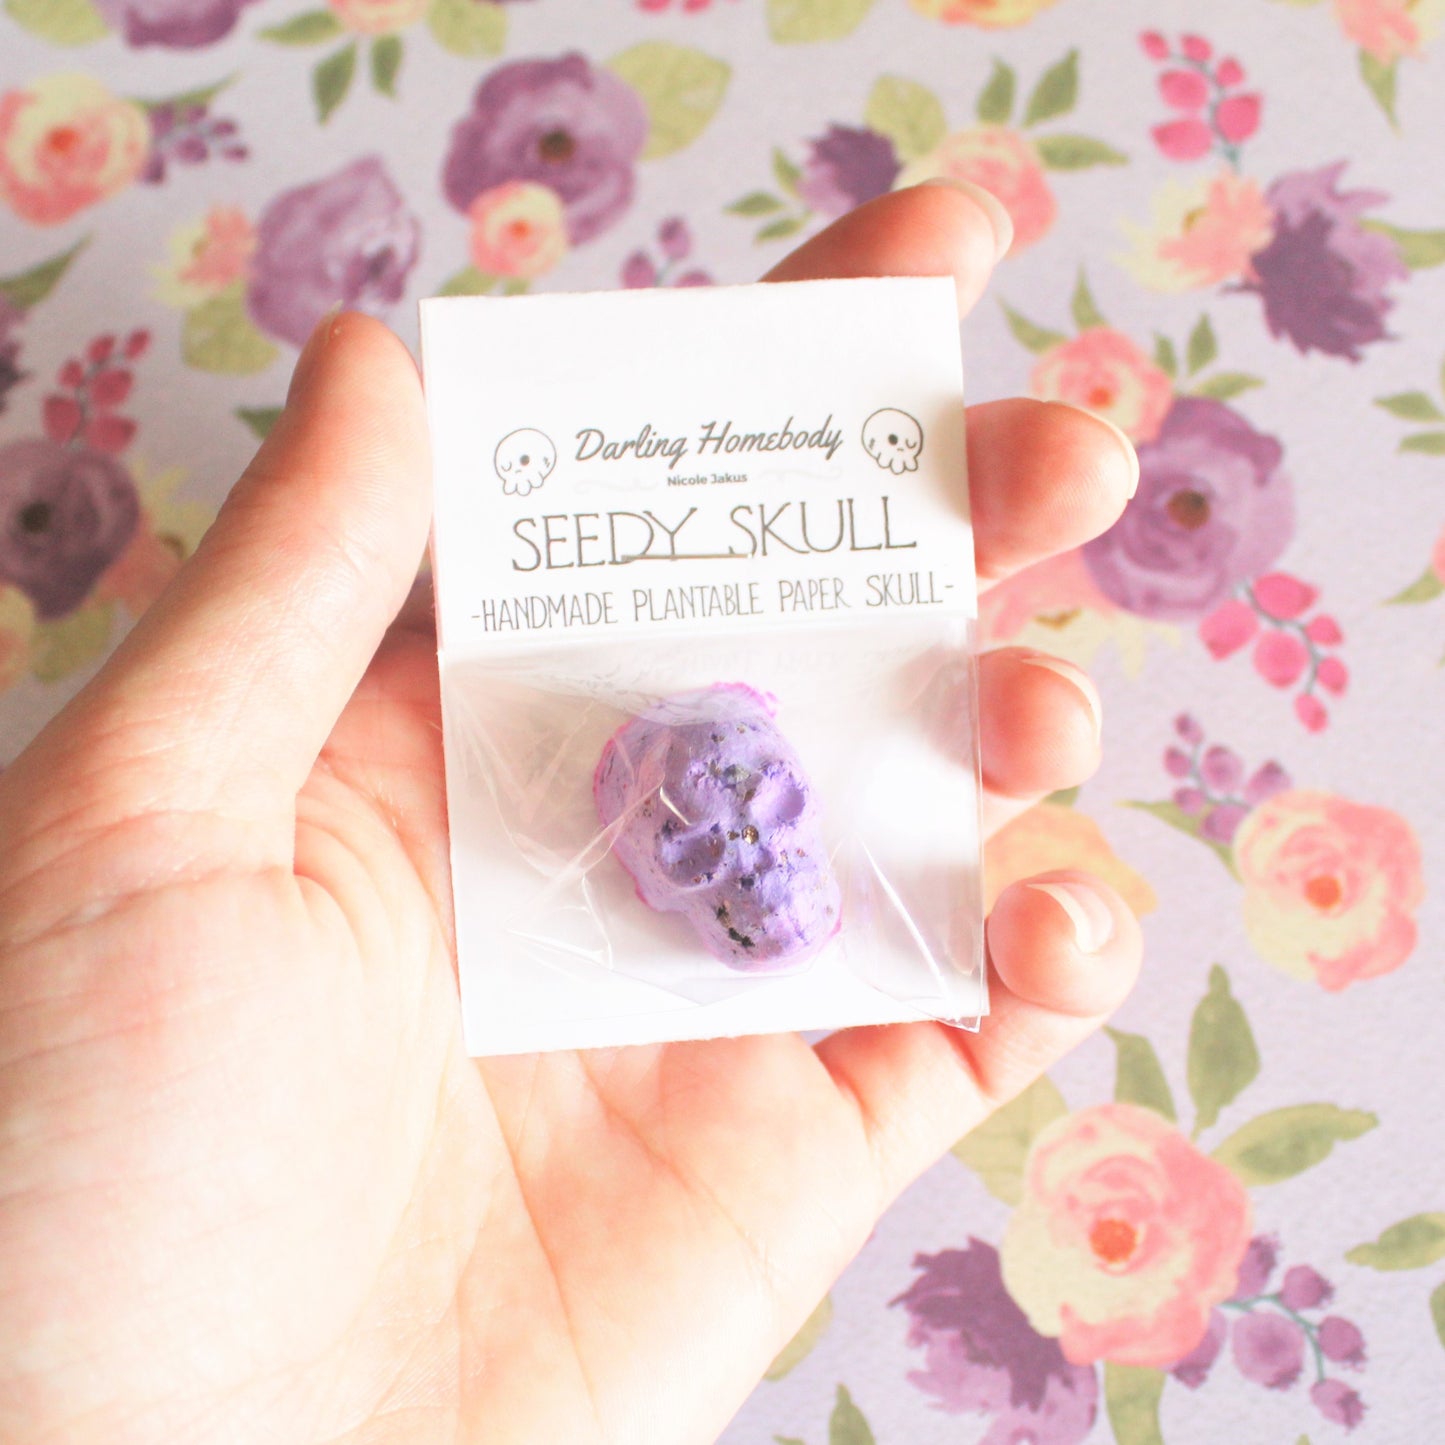 Single Purple Plantable Paper Skull / Seedy Skull Seed Bomb / Recycled Paper Pulp Craft / Spring Summer Small Gift / Wild Flowers